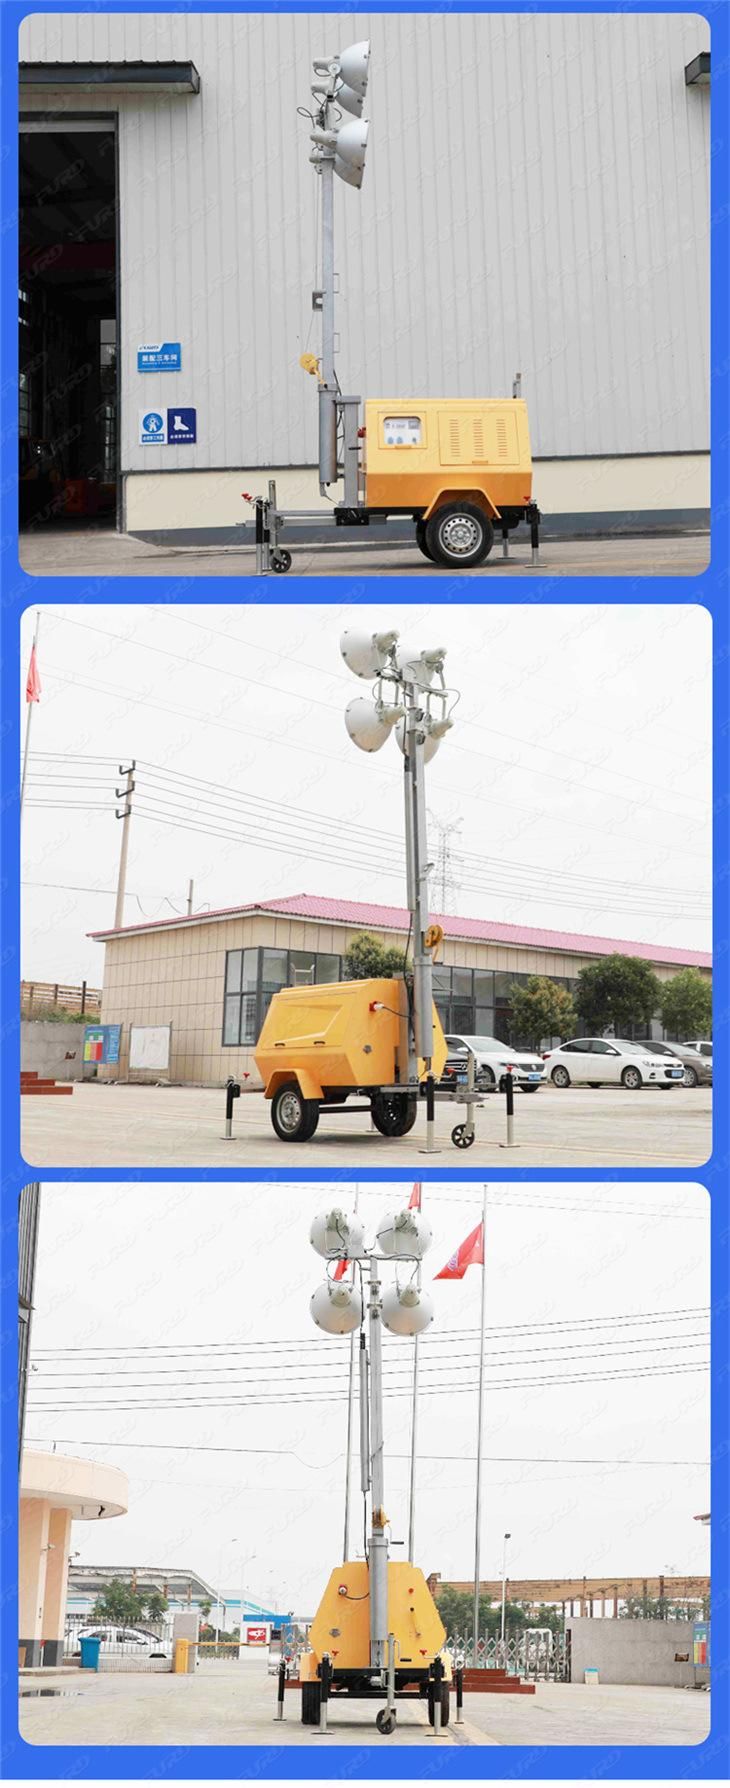 9m Trailer Vehicle-Mounted Light Tower with LED or Metal Halide Lamp